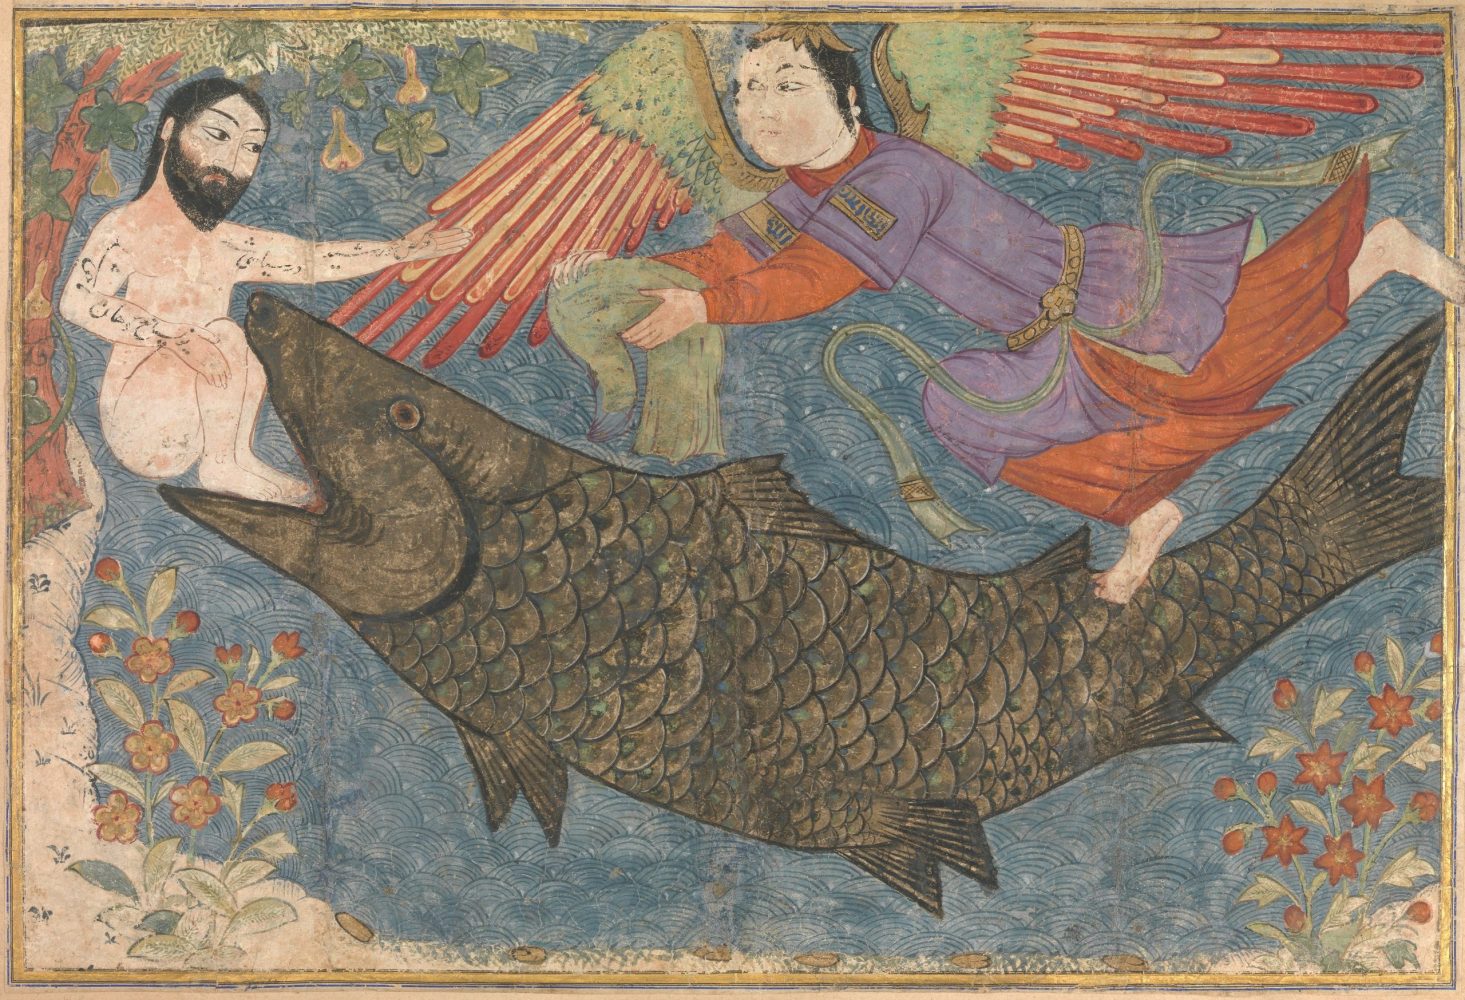 "Jonah and the Whale", Folio from a Jami al-Tavarikh (Compendium of Chronicles) ca. 1400